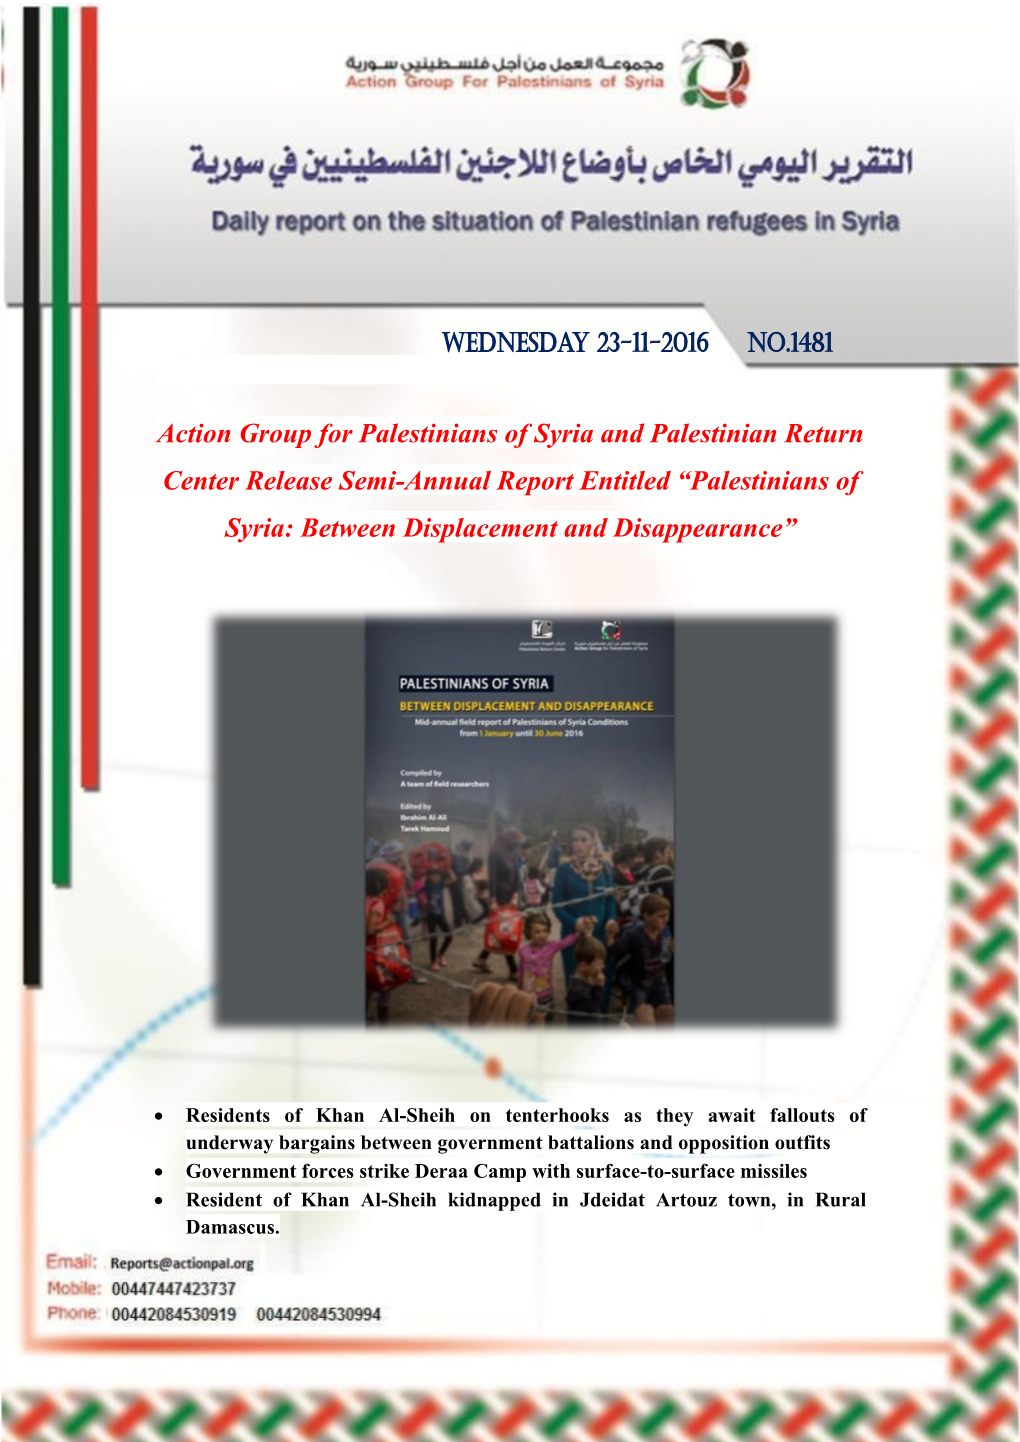 Palestinians of Syria and Palestinian Return Center Release Semi-Annual Report Entitled “Palestinians of Syria: Between Displacement and Disappearance”